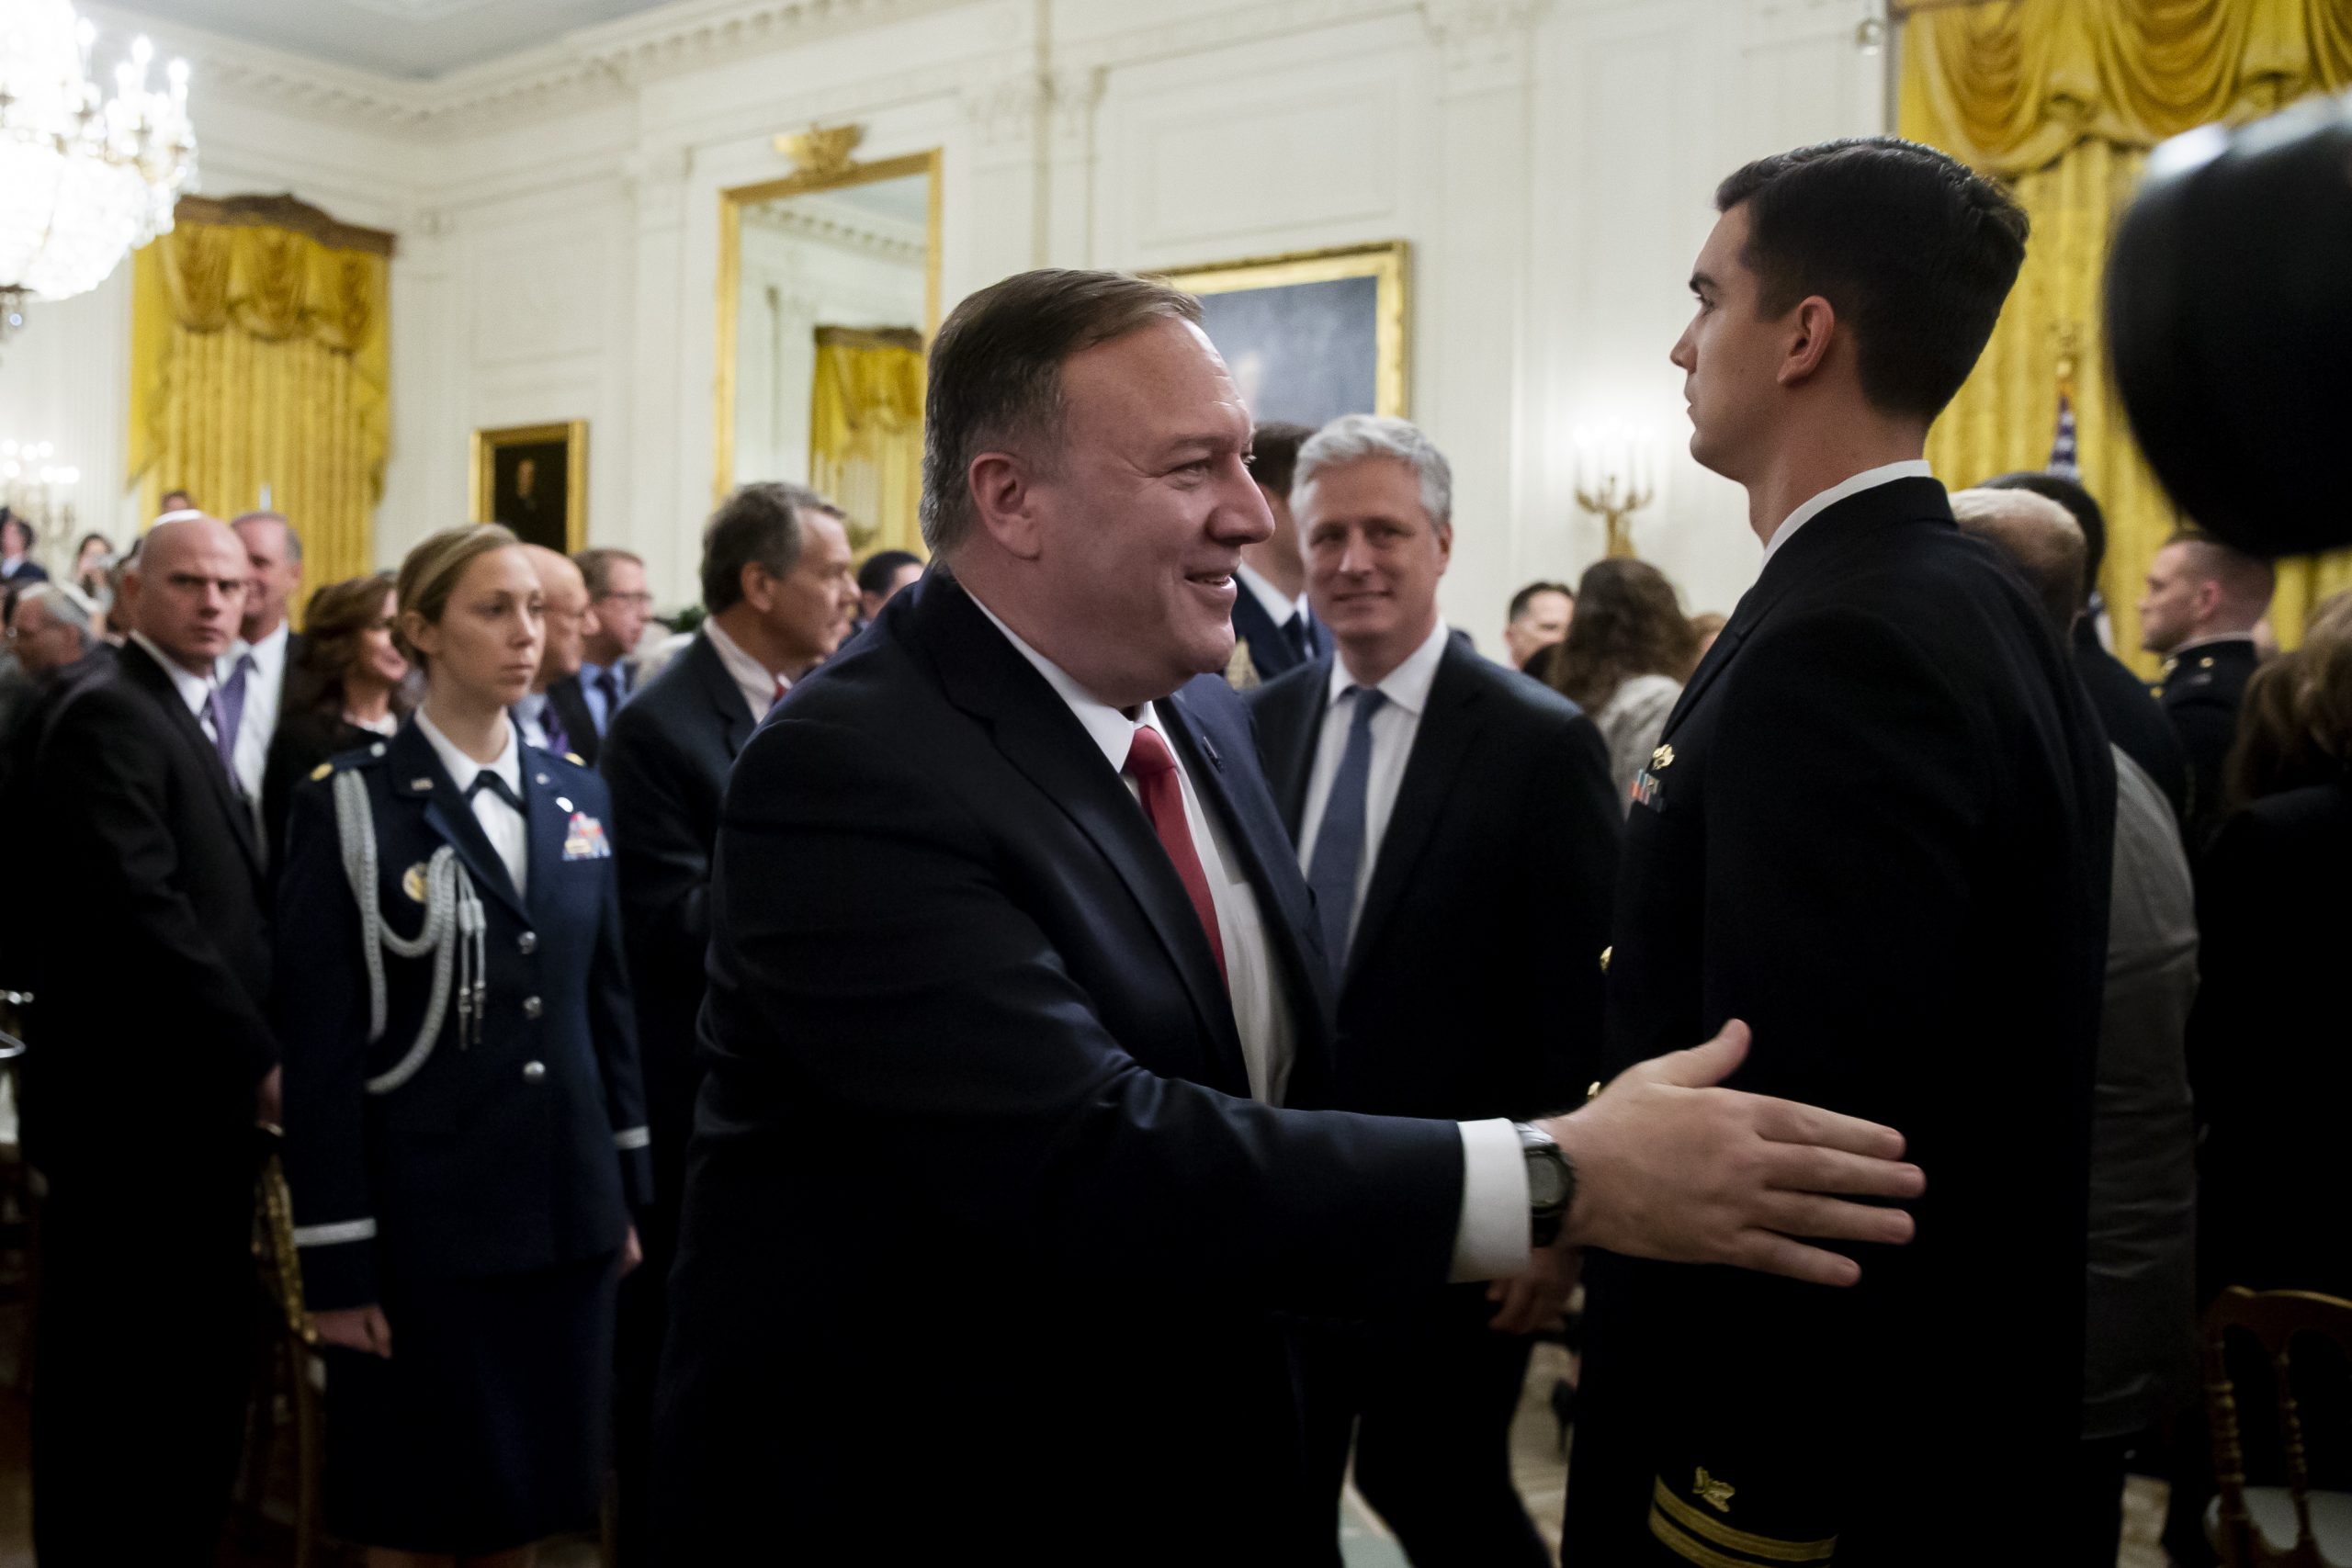 epa08173389 US Secretary of State Mike Pompeo (C) leaves the East Room after the unveiling of US President Donald J. Trump's Middle East peace plan, at the White House in Washington, DC, USA, 28 January 2020. US President Donald J. Trump's Middle East peace plan has already been rejected by Palestinian leaders, having withdrawn from engagement with the White House after Trump recognized Jerusalem as the capital of Israel. The proposal was announced while Netanyahu and his political rival, Benny Gantz, both visit Washington, DC.  EPA/MICHAEL REYNOLDS